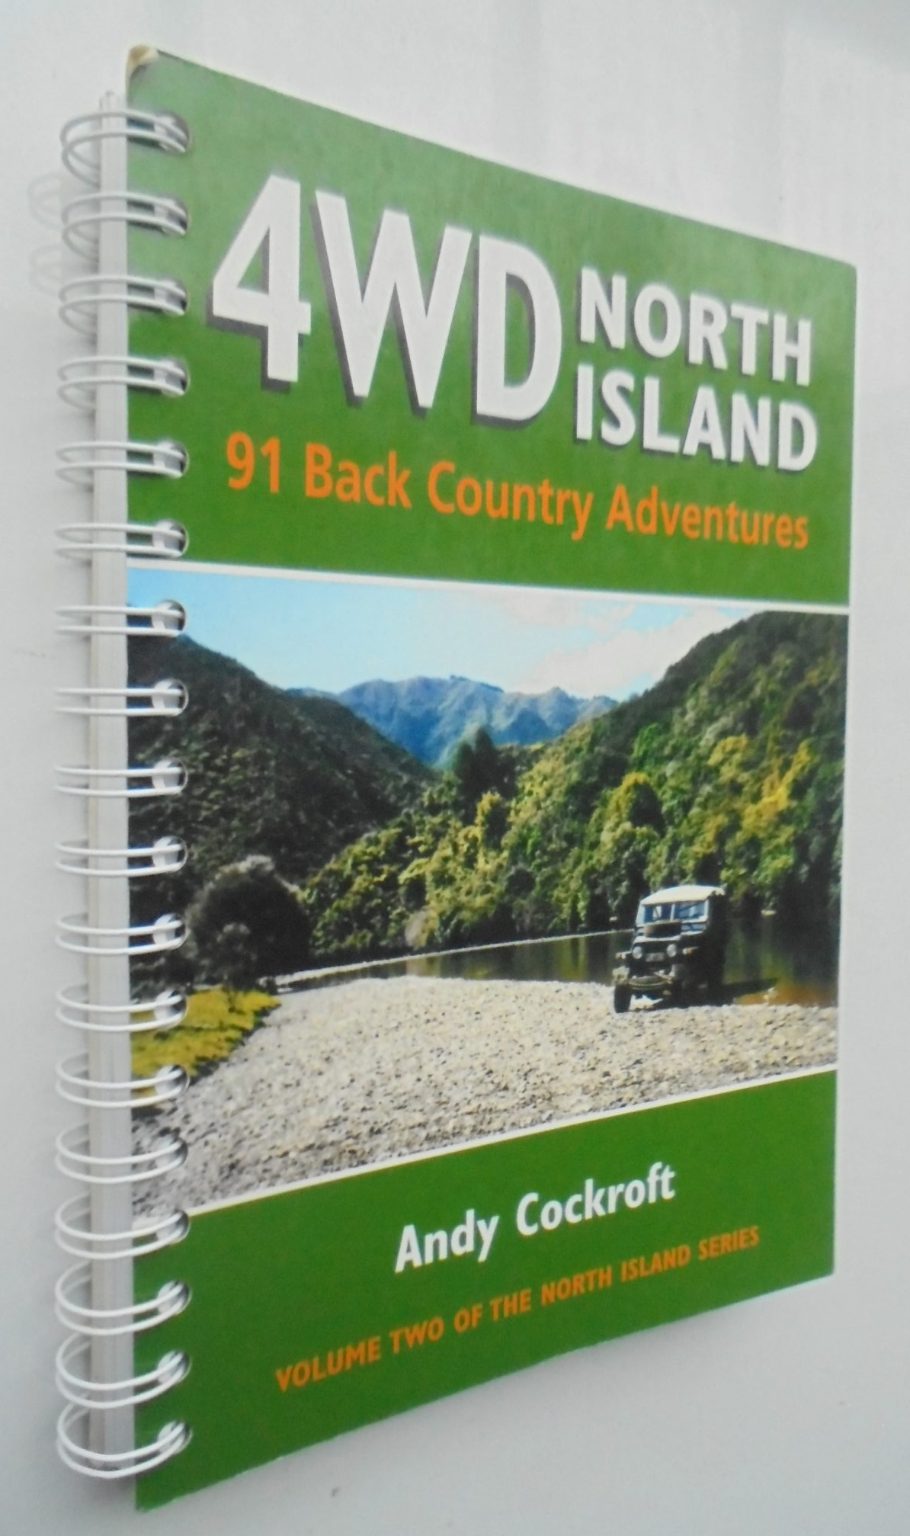 4wd North Island 91 Back Country Adventures (North island series) By Andy Cockroft